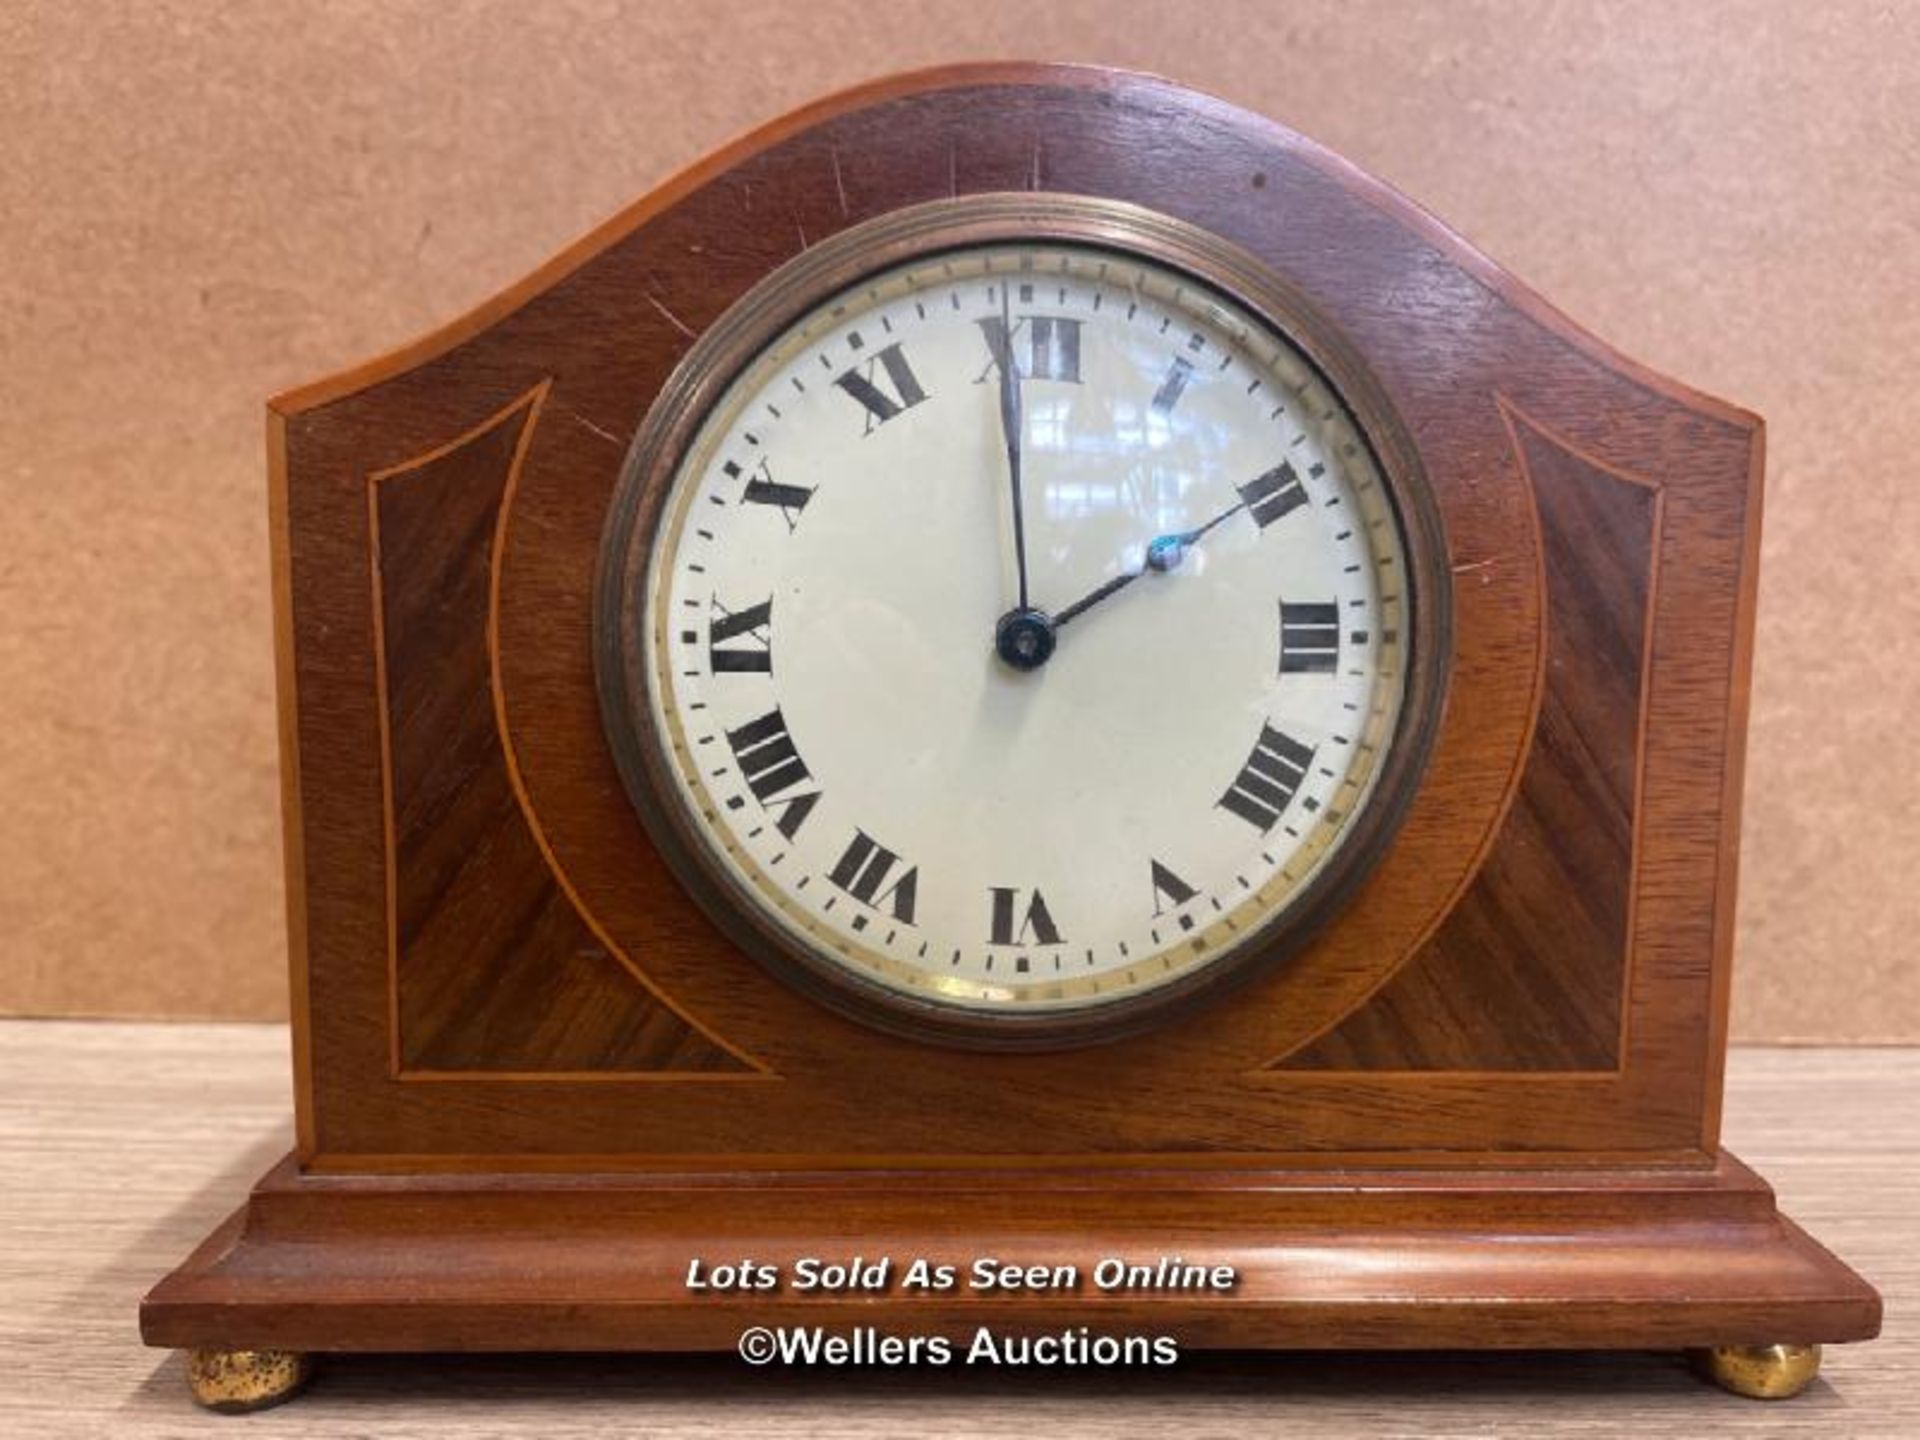 SMALL ANTIQUE MANTLE CLOCK CONVERTED TO BATTERY POWER, 15.5CM HIGH